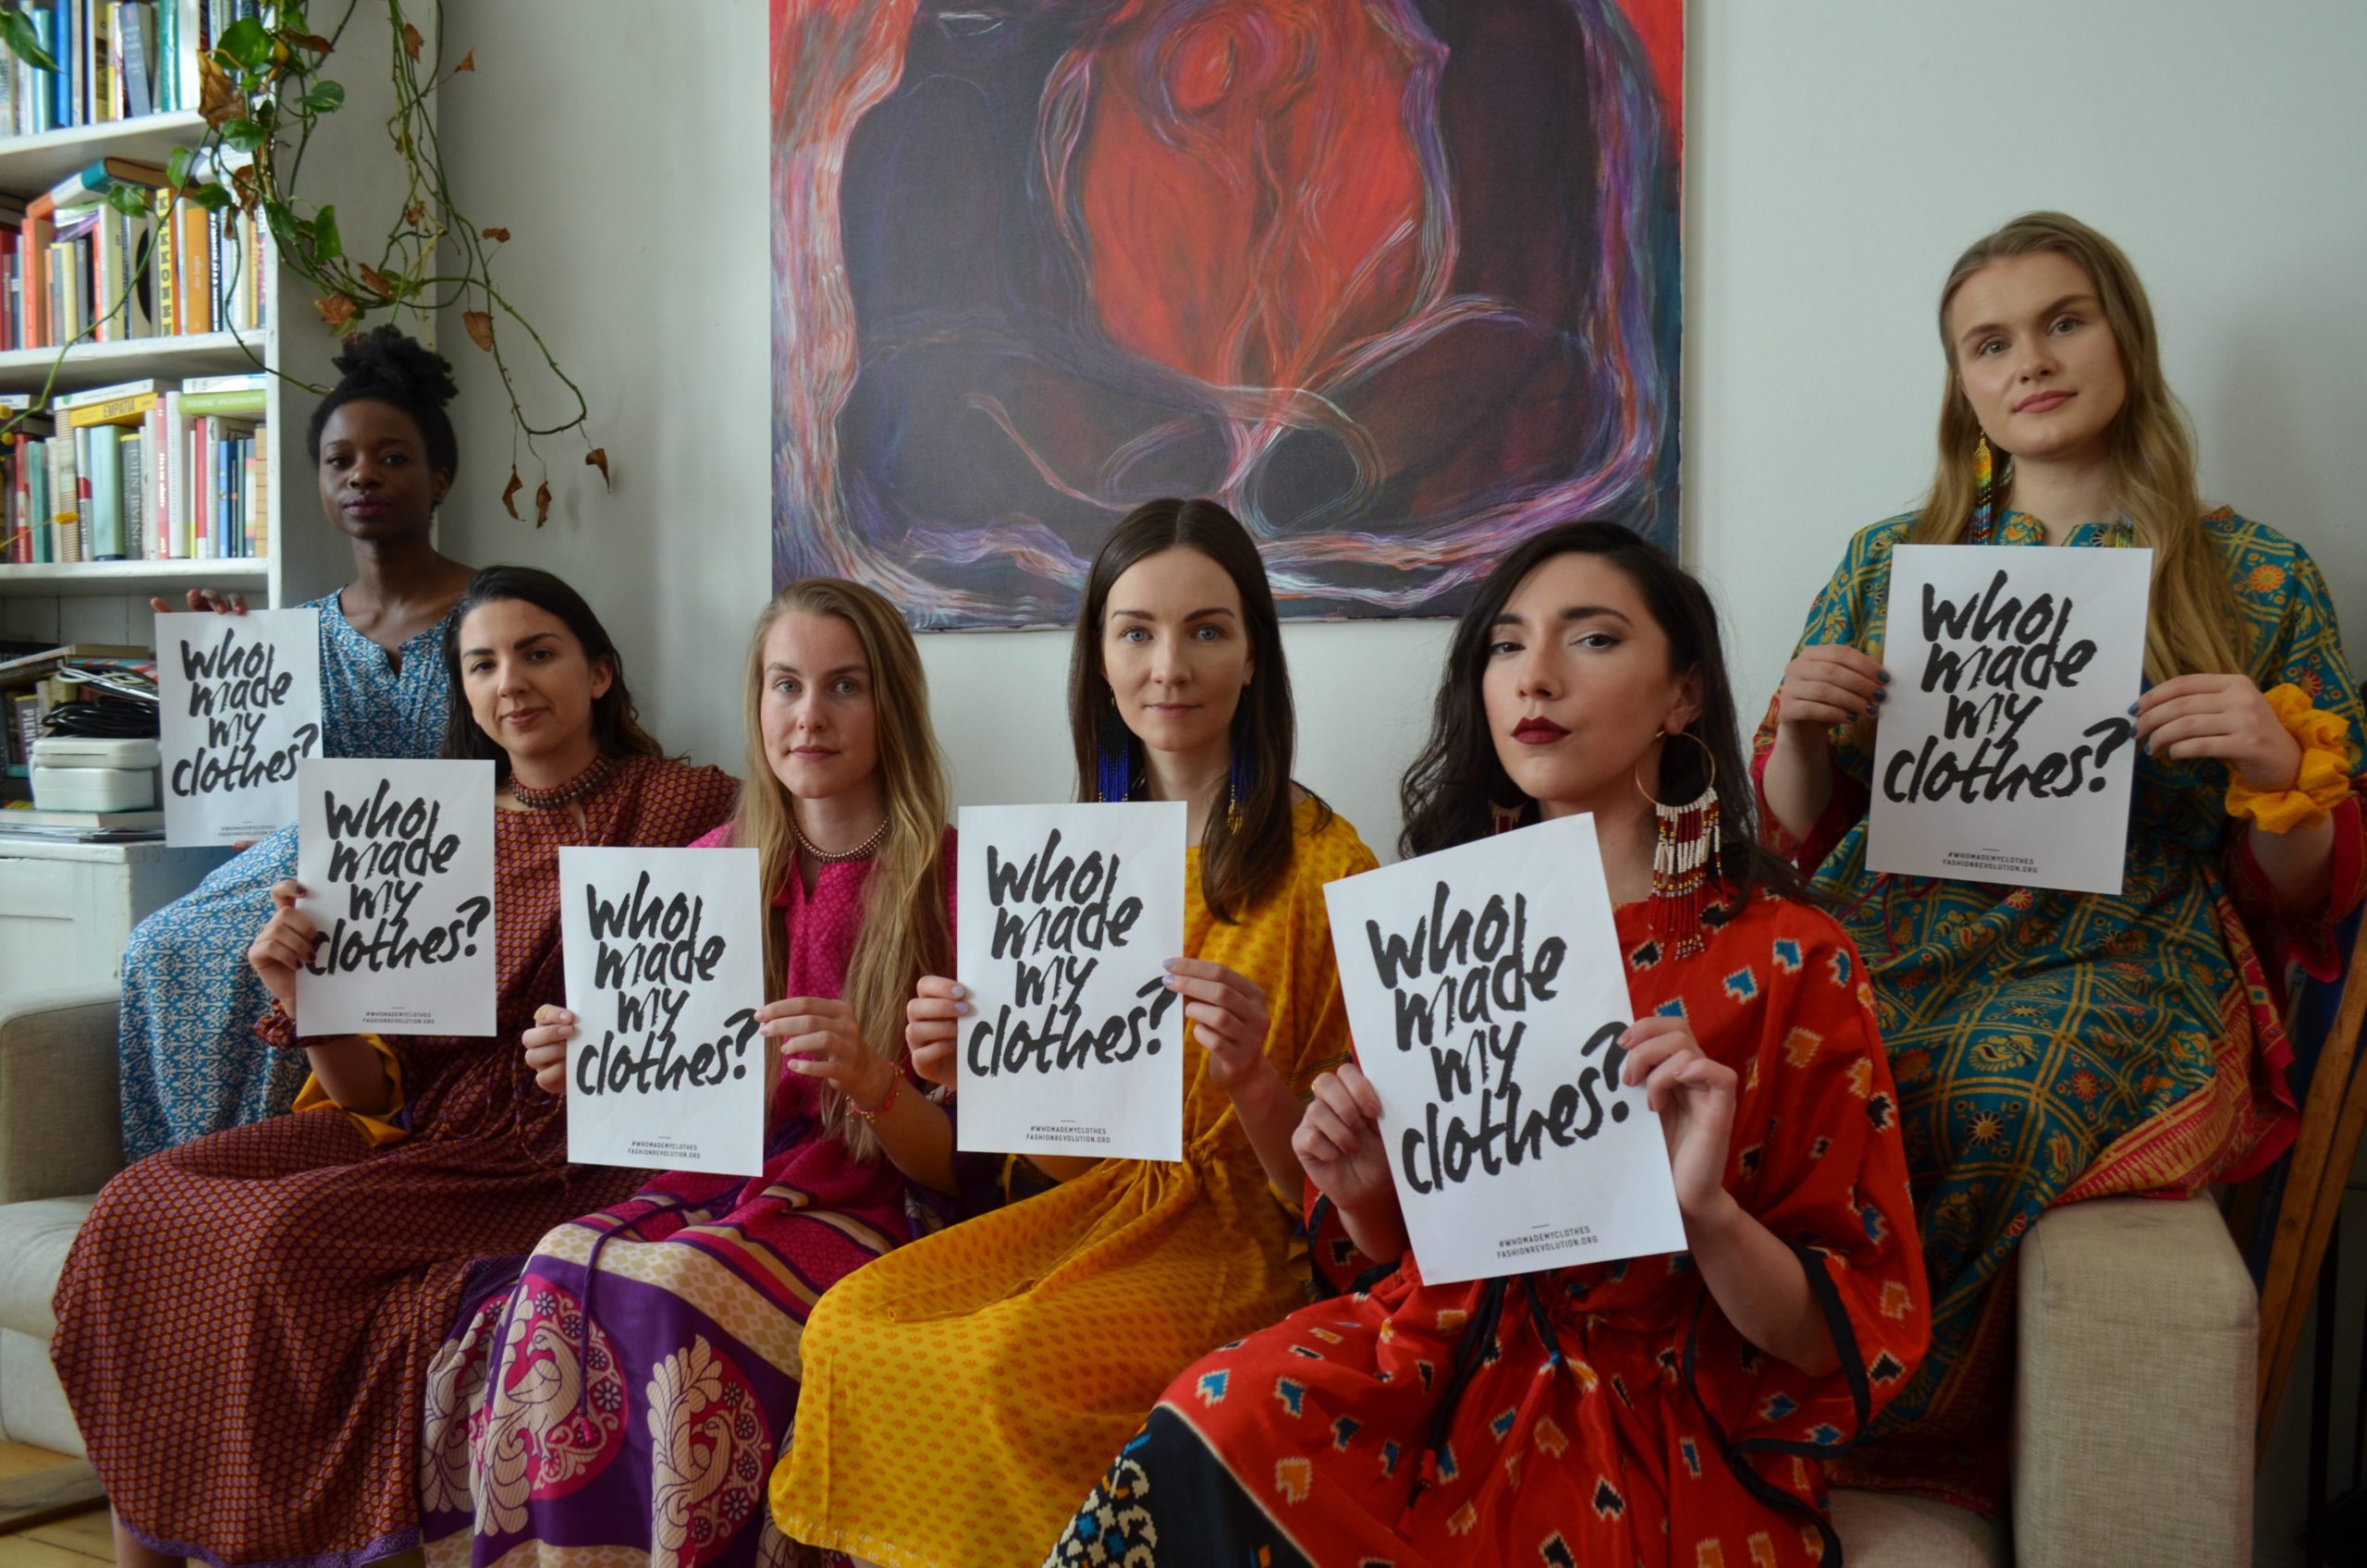 Women holding signs that say "Who made my clothes?"